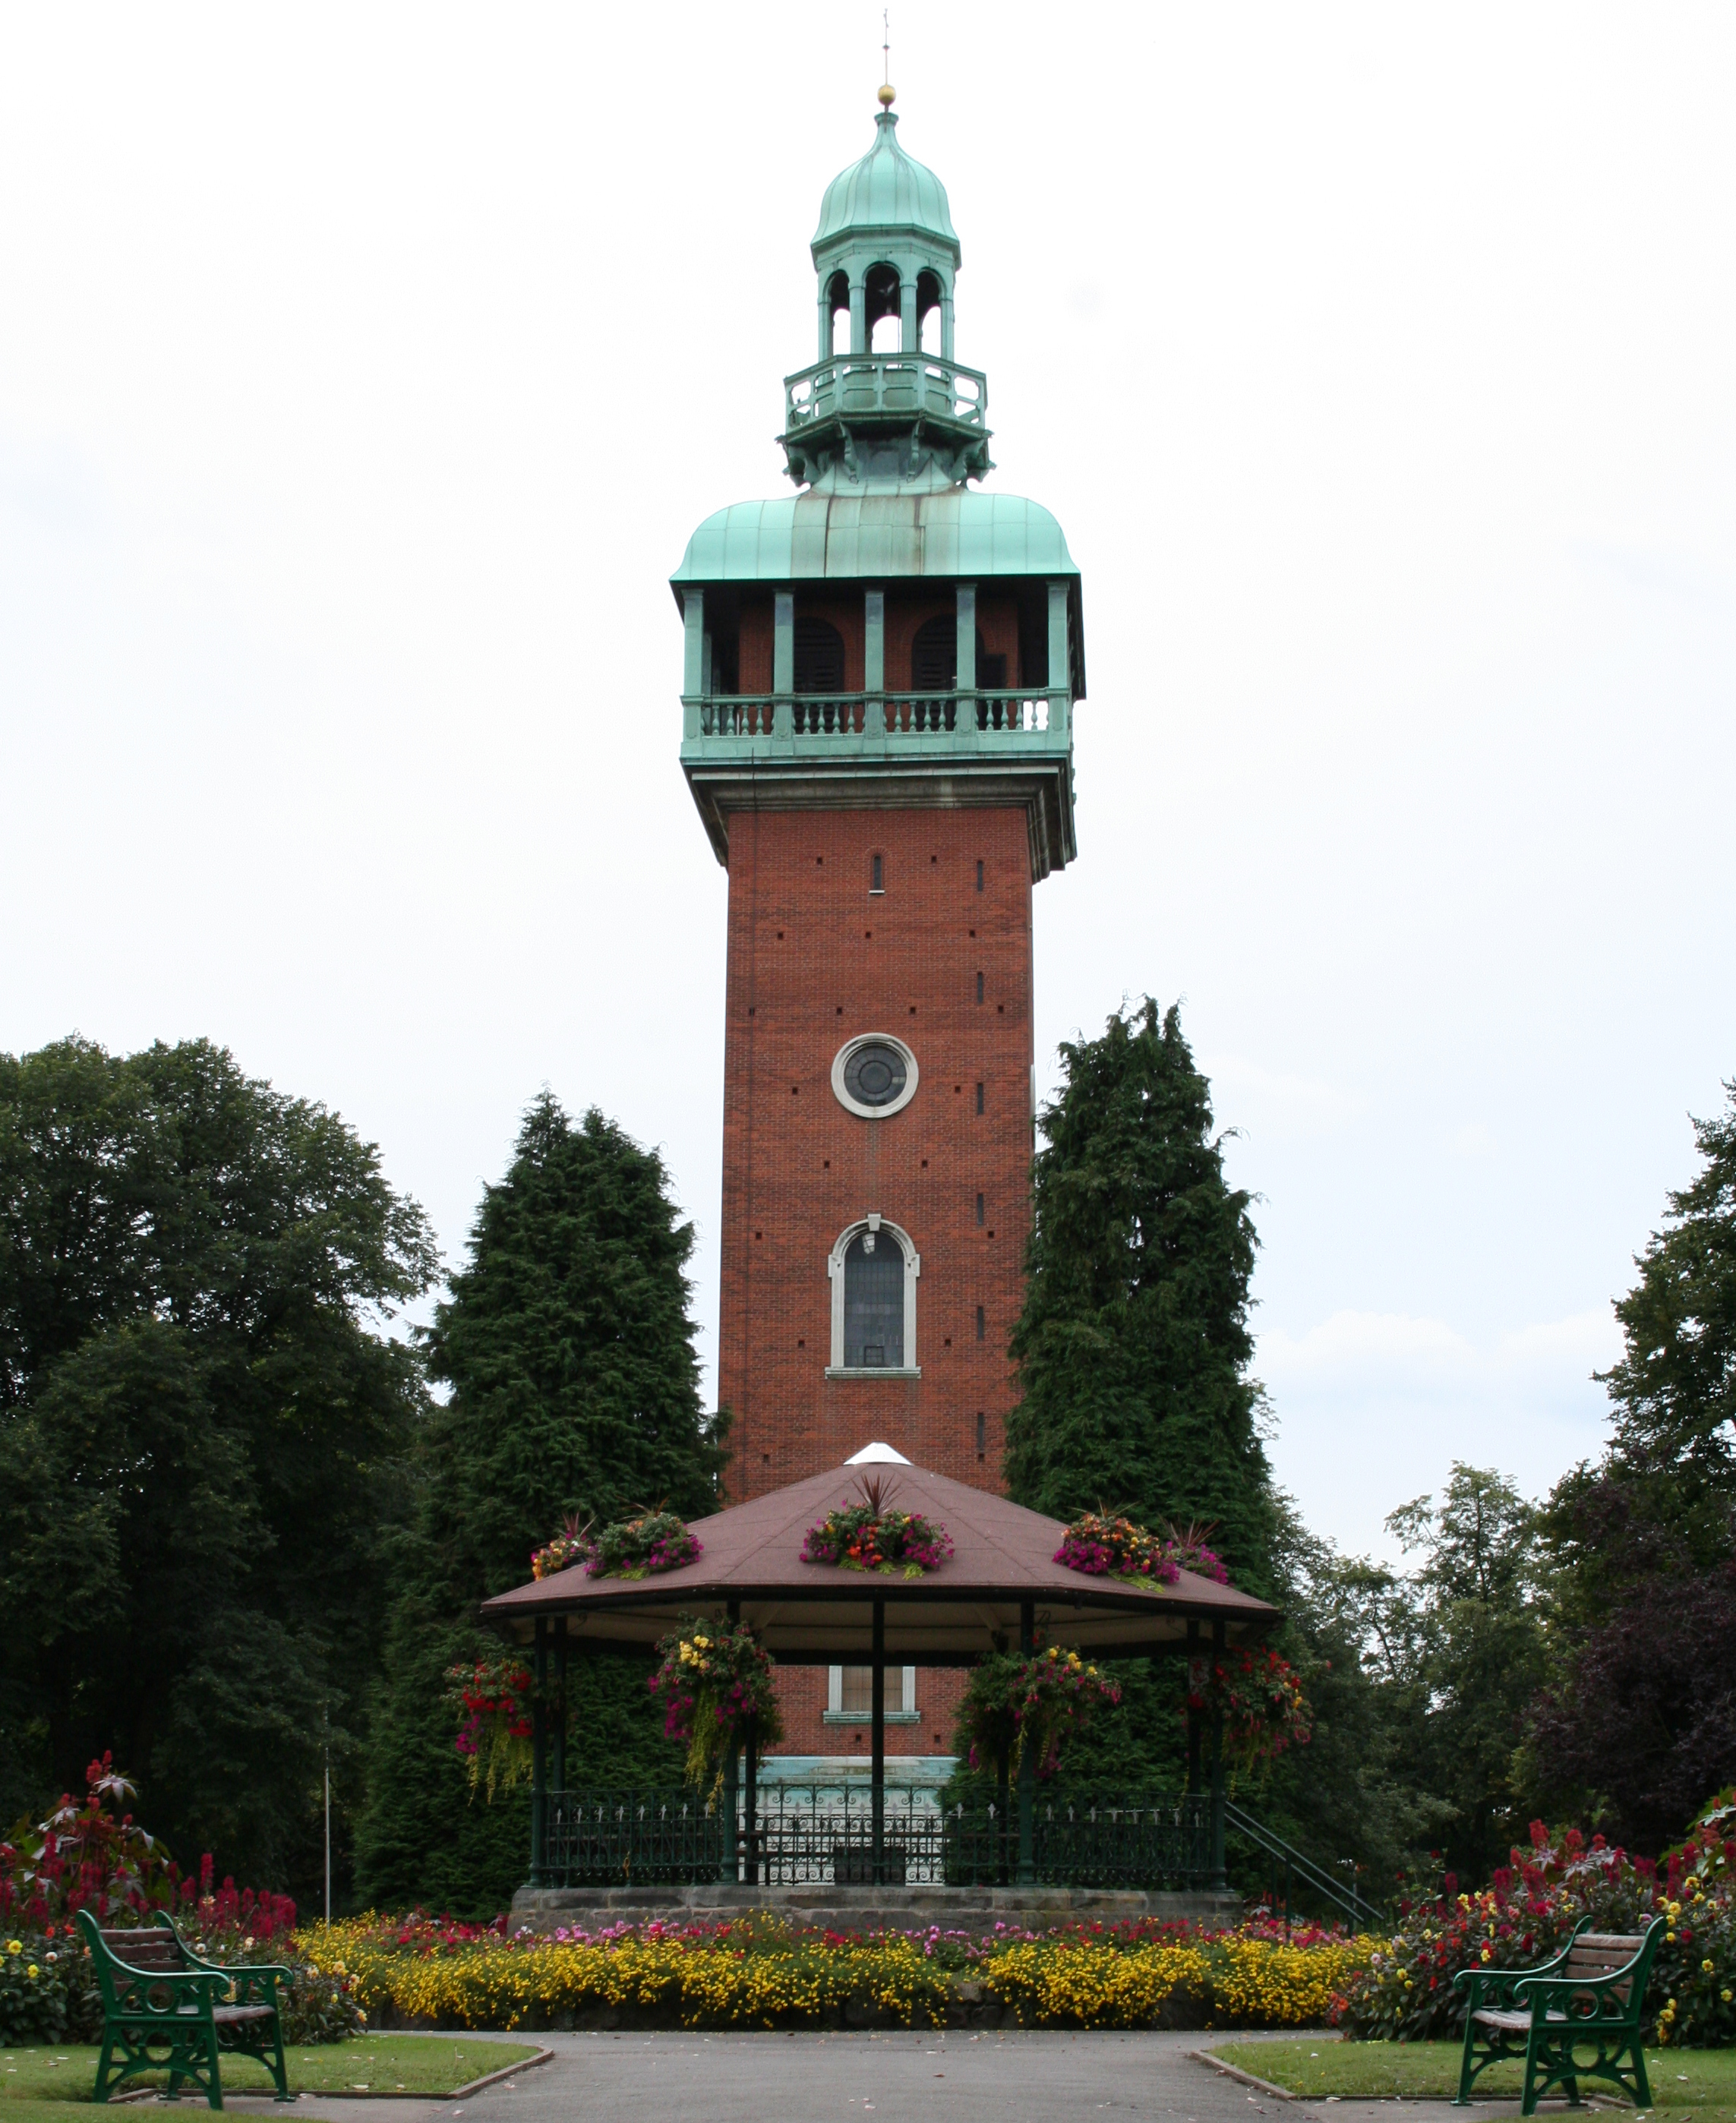 Queen's Park - Parks and open spaces - Charnwood Borough ...